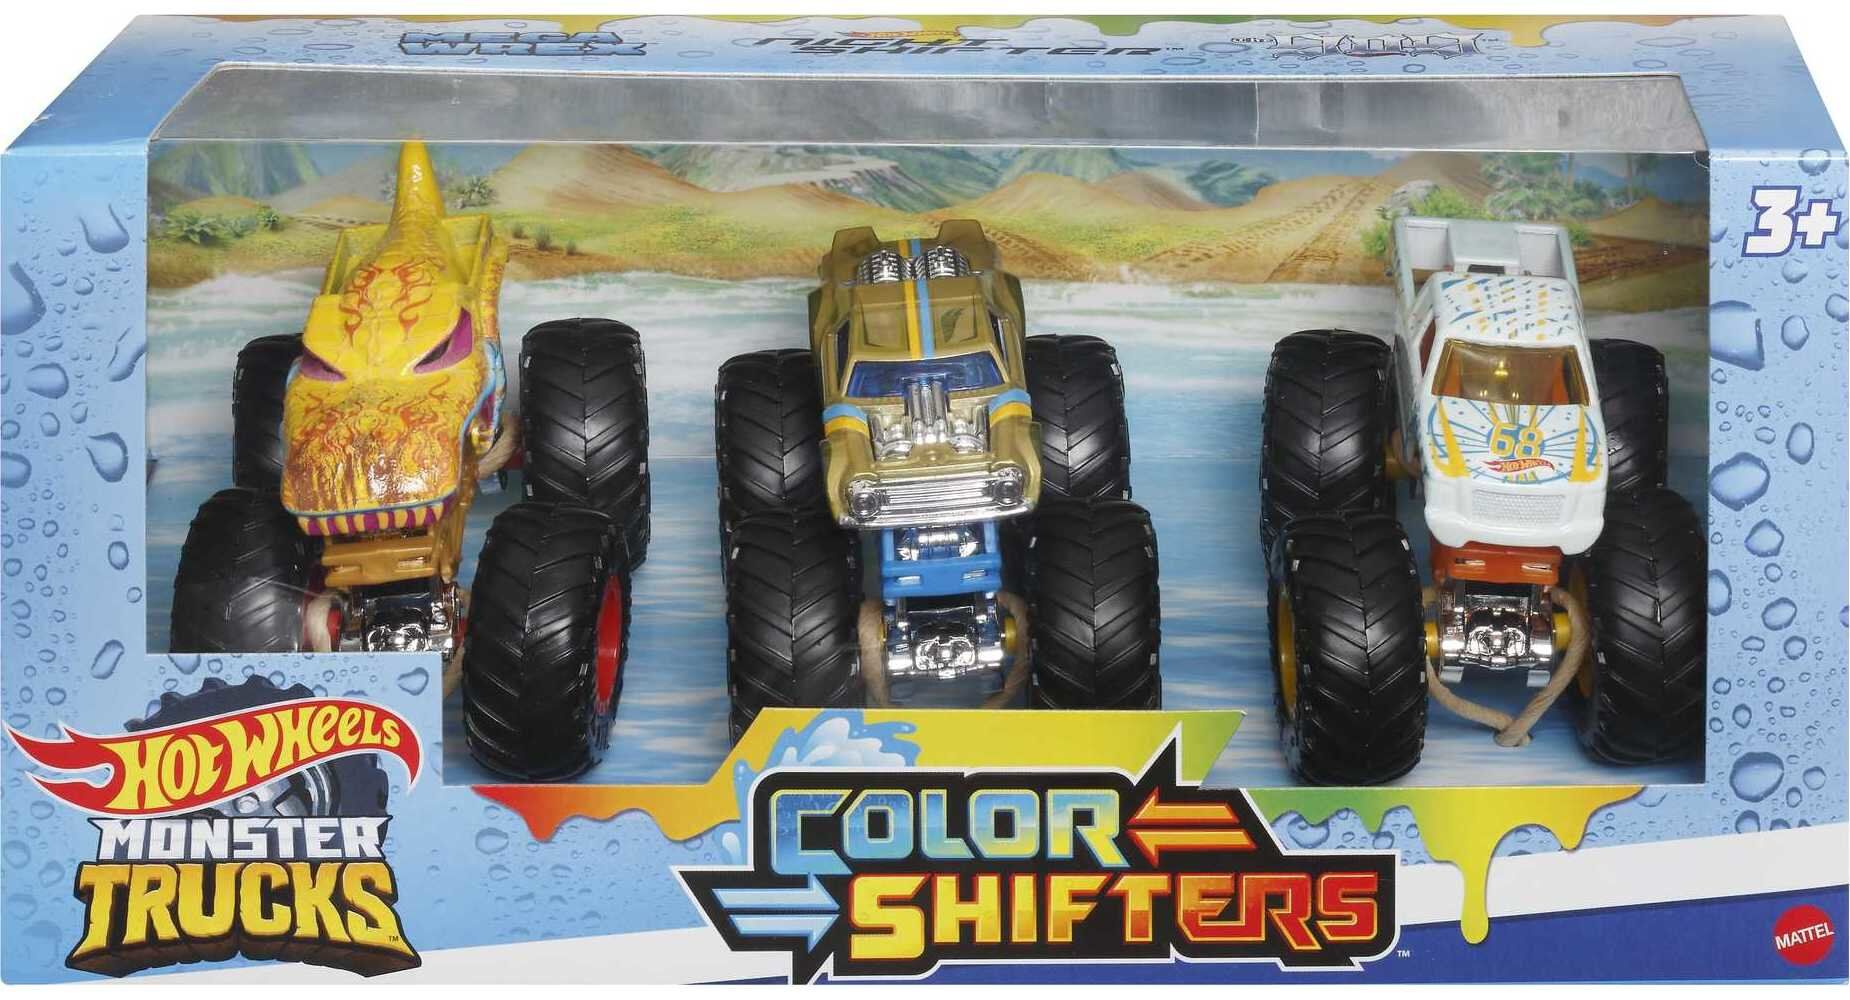 ​Hot Wheels Monster Trucks 1:64 Color Shifters, 3-Pack of Toy Trucks that Change Decos in Ice C... | Walmart (US)